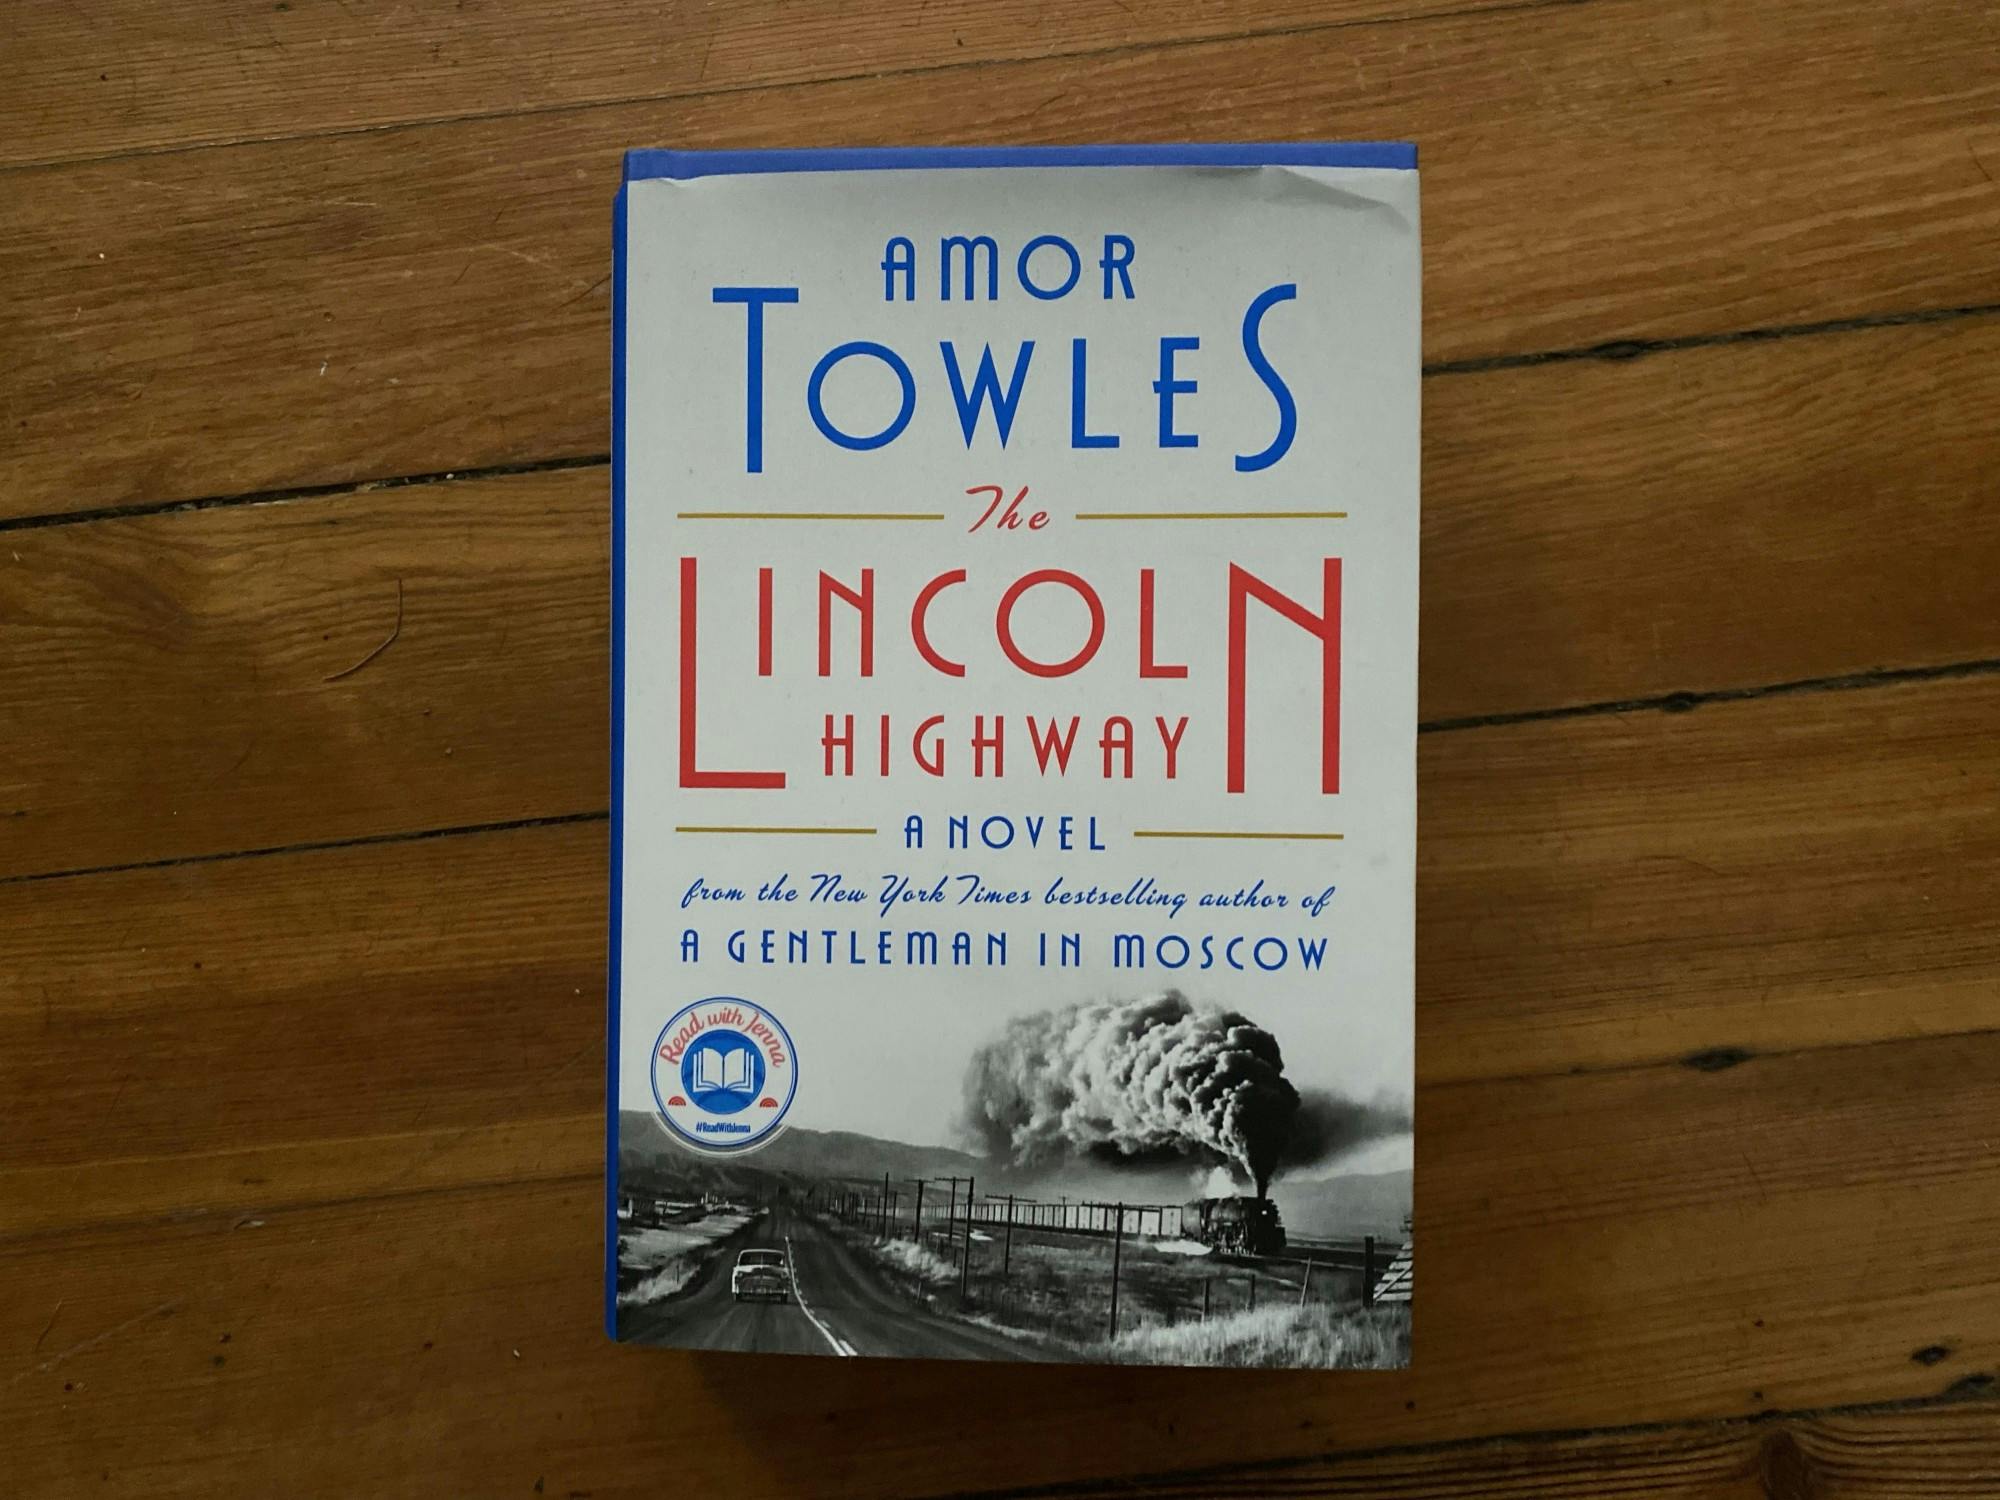 amor towles the lincoln highway